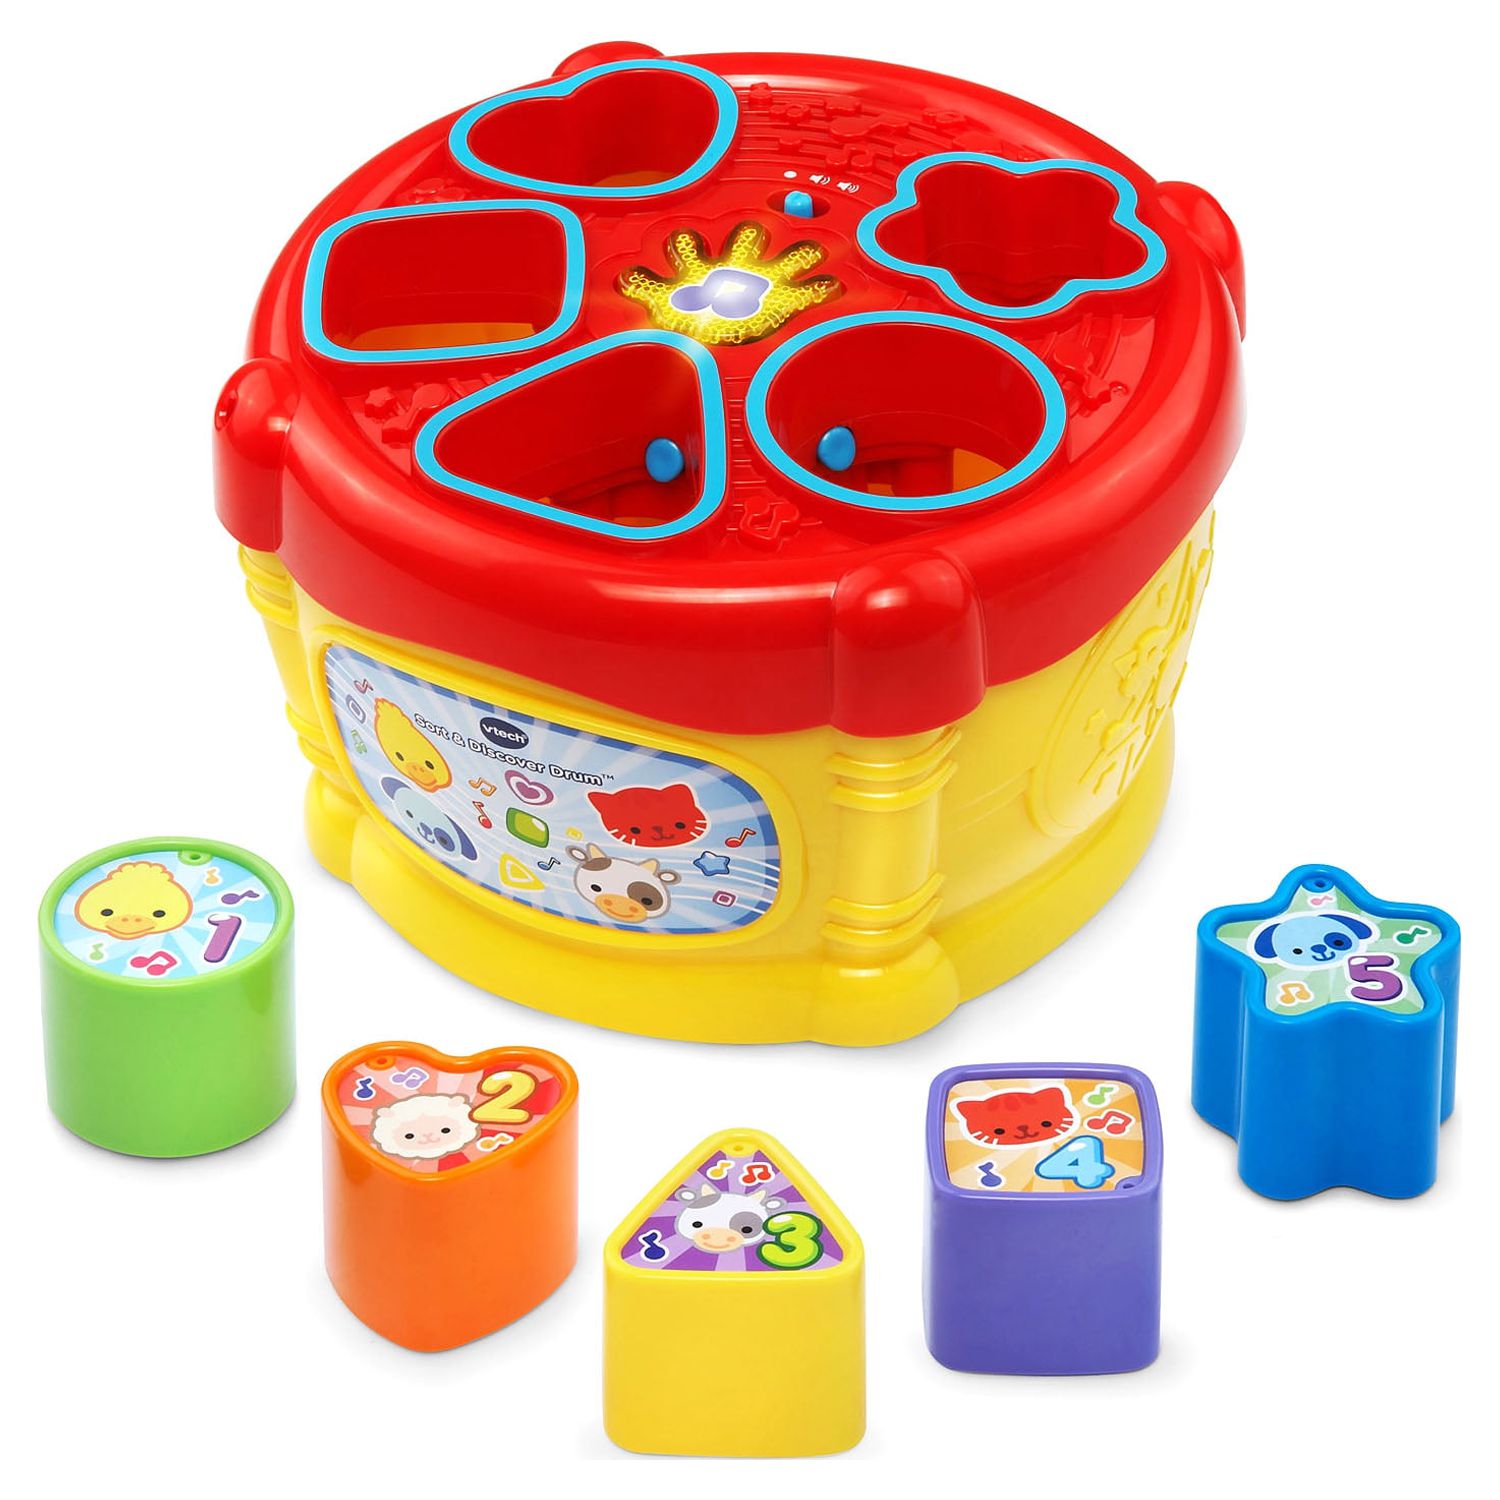 VTech, Sort and Discover Drum, Interactive Learning Toy, Baby Drum - image 1 of 9